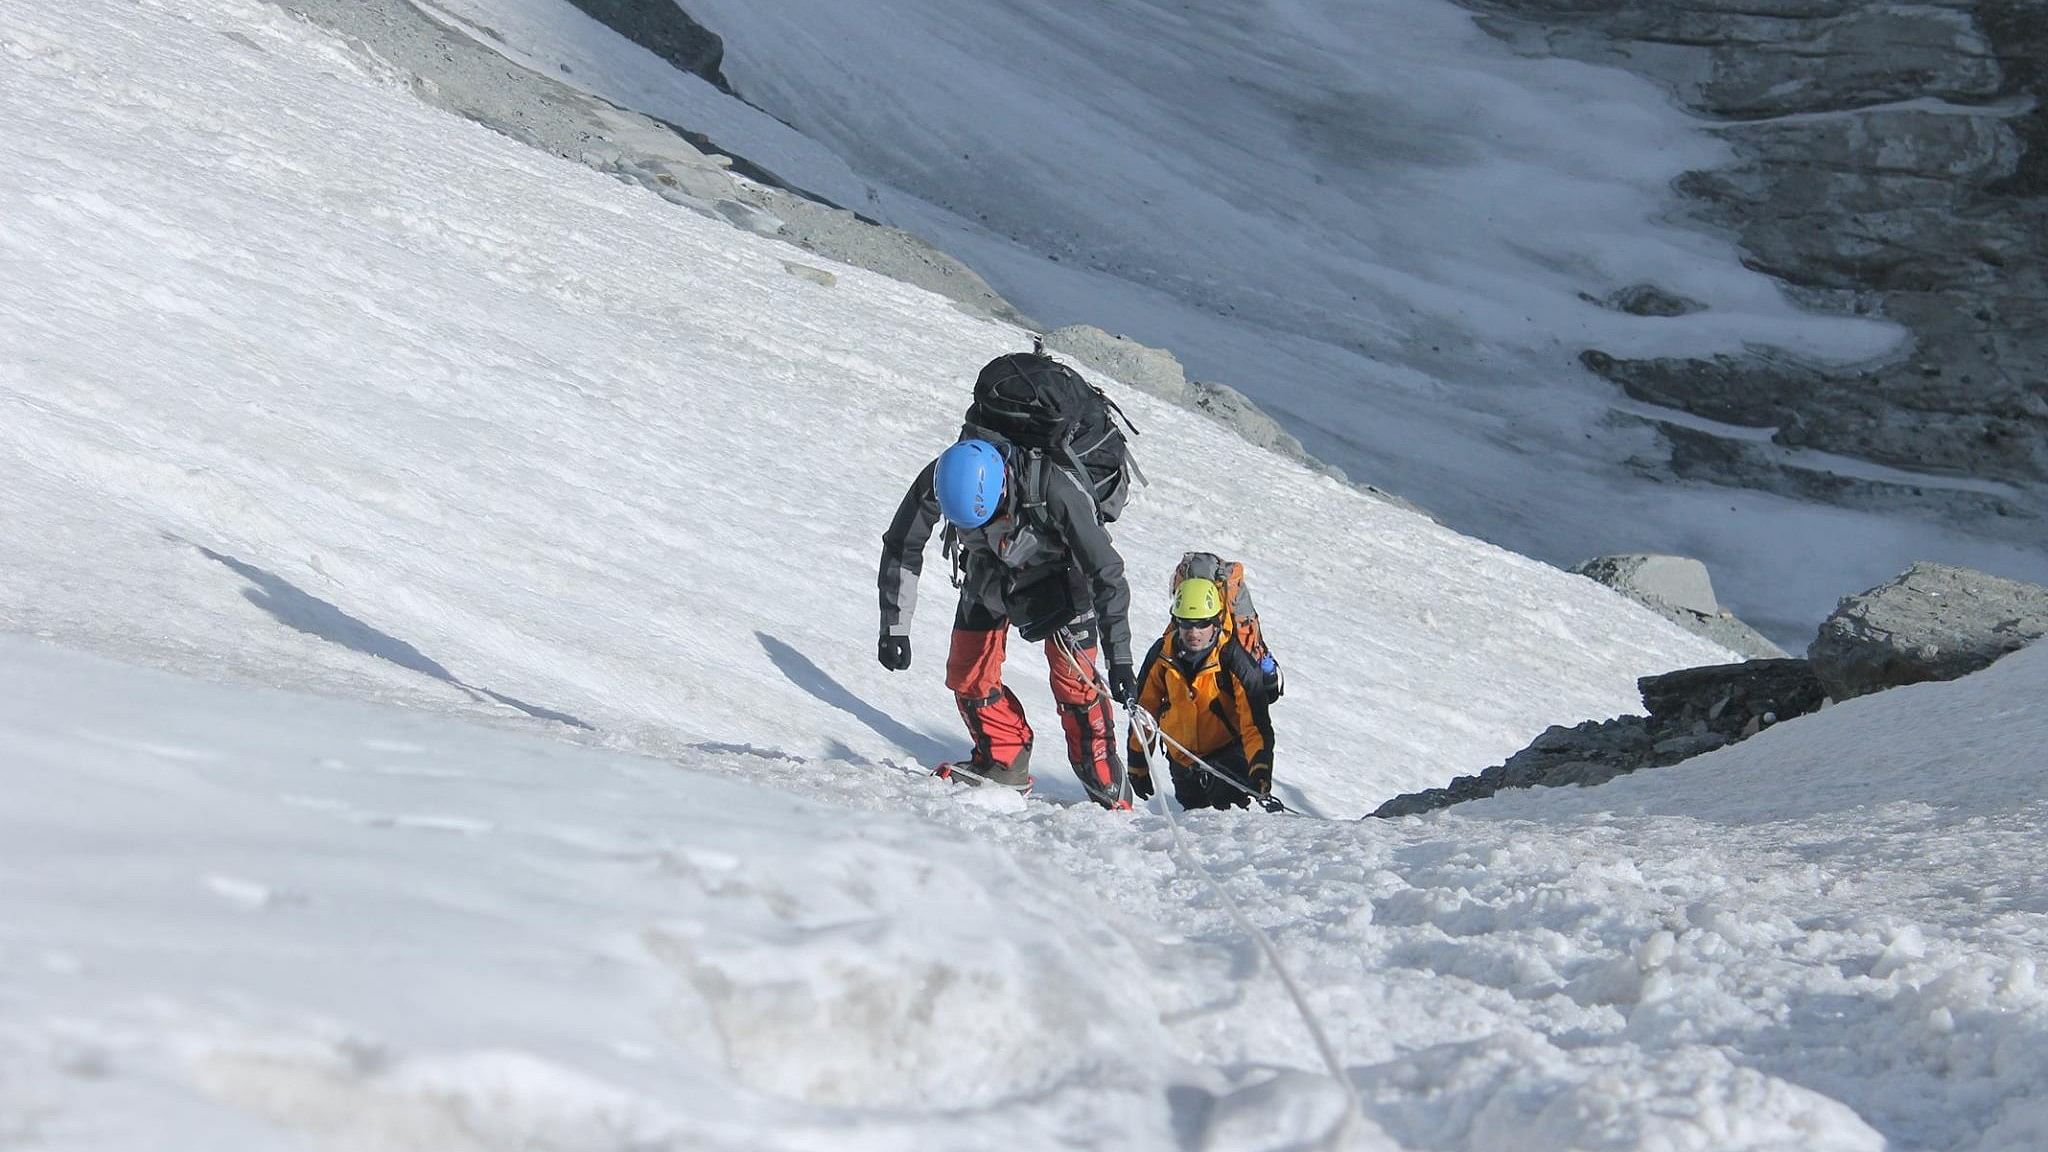 <div class="paragraphs"><p>Mountaineers seen scaling a snow clad peak.</p></div>